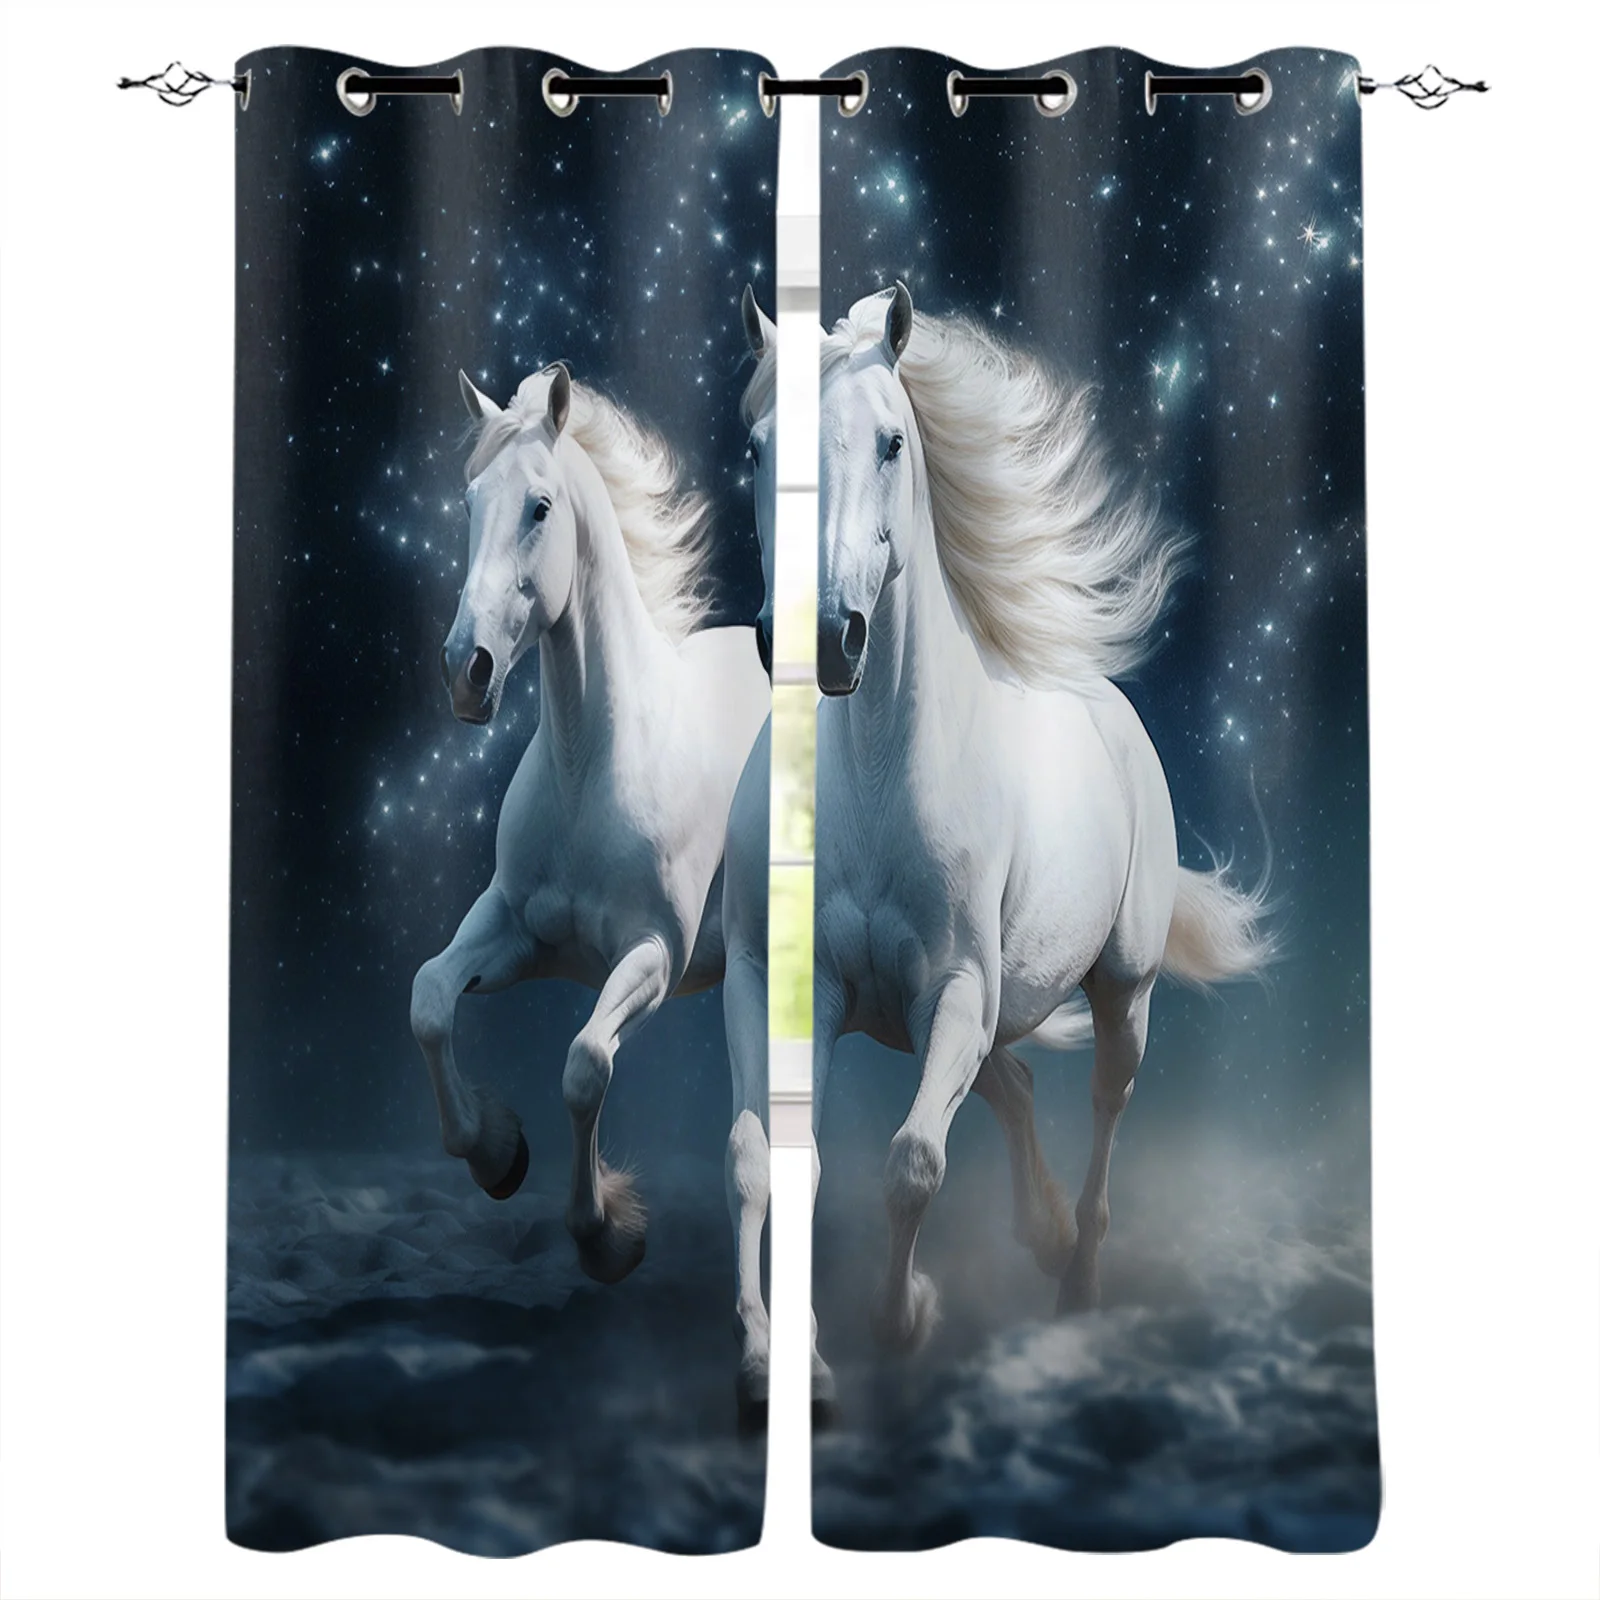 

Horse Starry Sky Clouds Window Curtains for Living Room Bedroom Home Decor Kitchen Curtains Modern Balcony Drapes